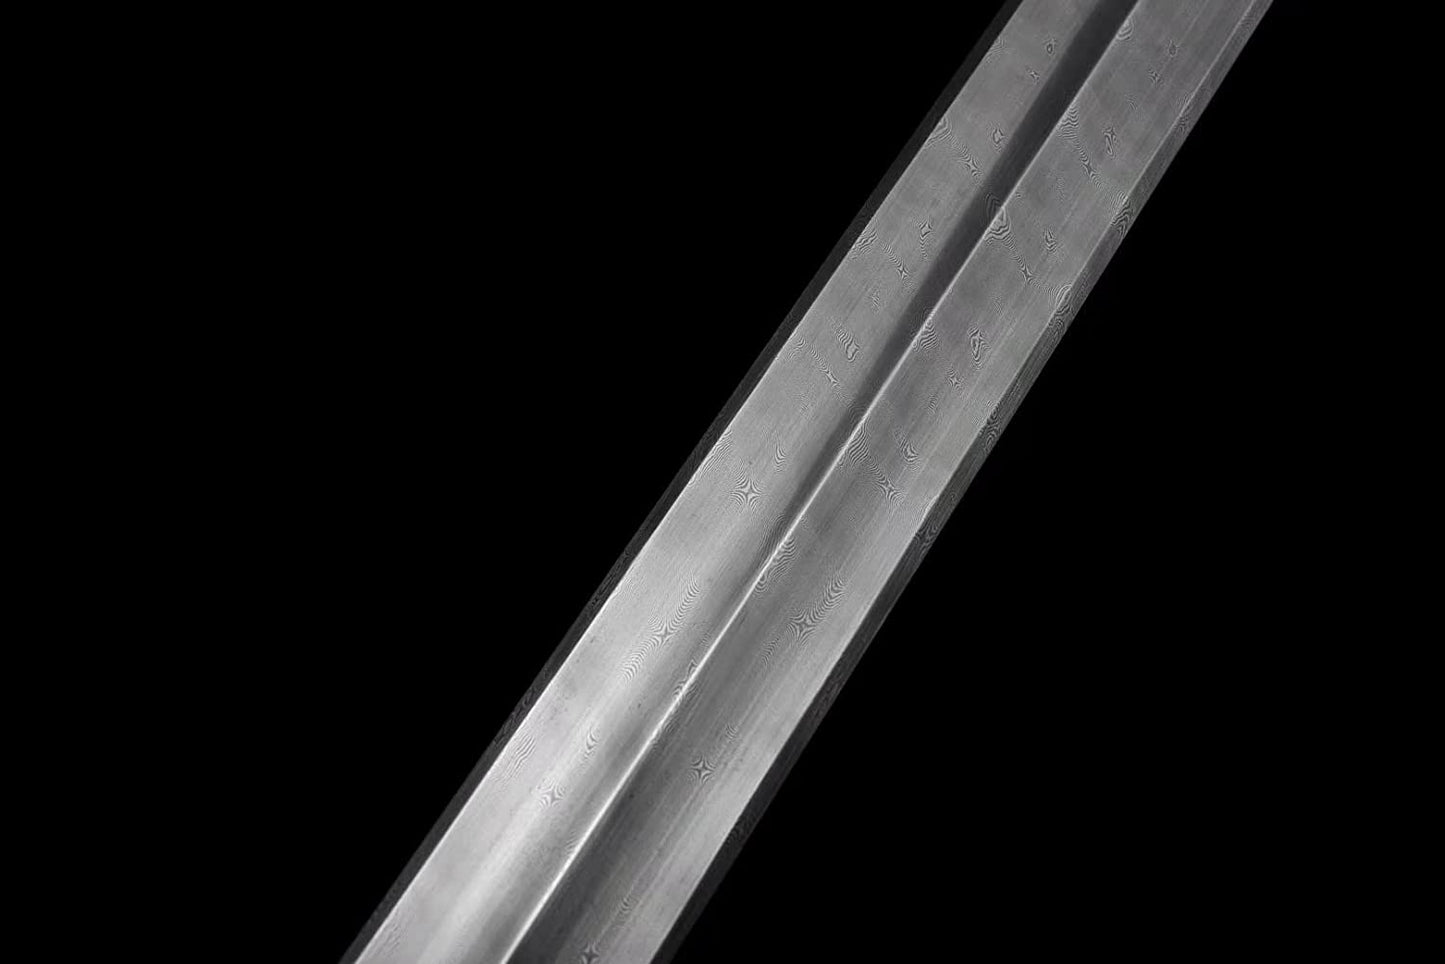 Yongle jian Sword,Hand Forged Damascus Blade,Ebony,Alloy Fittings,Chinese sword